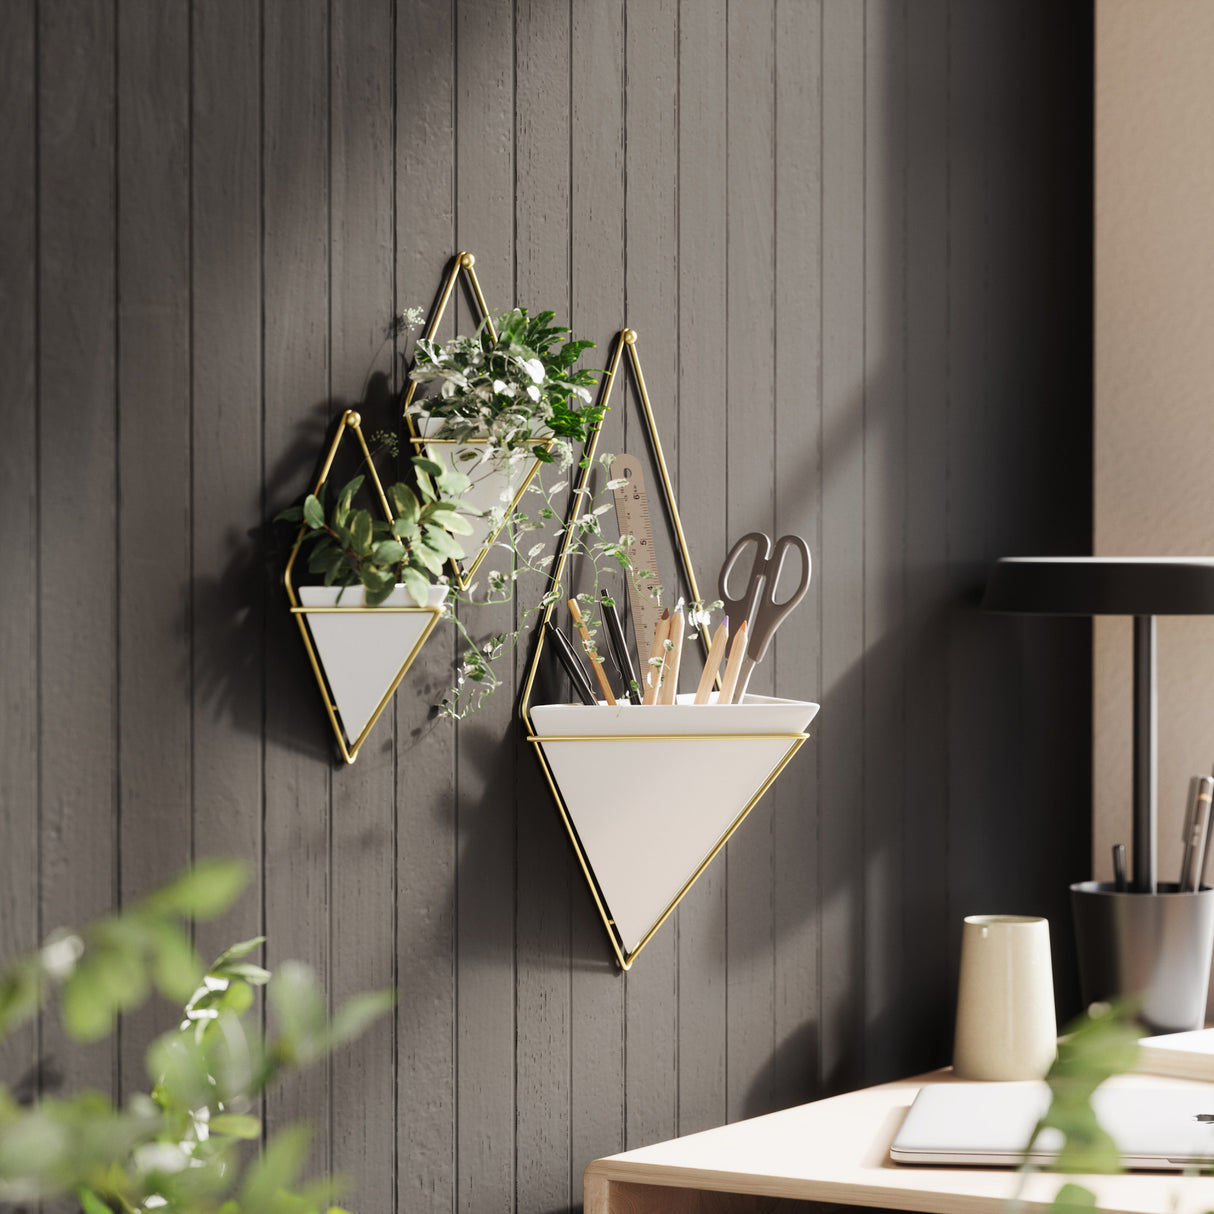 Wall Planters | color: White-Brass | https://player.vimeo.com/video/176224842